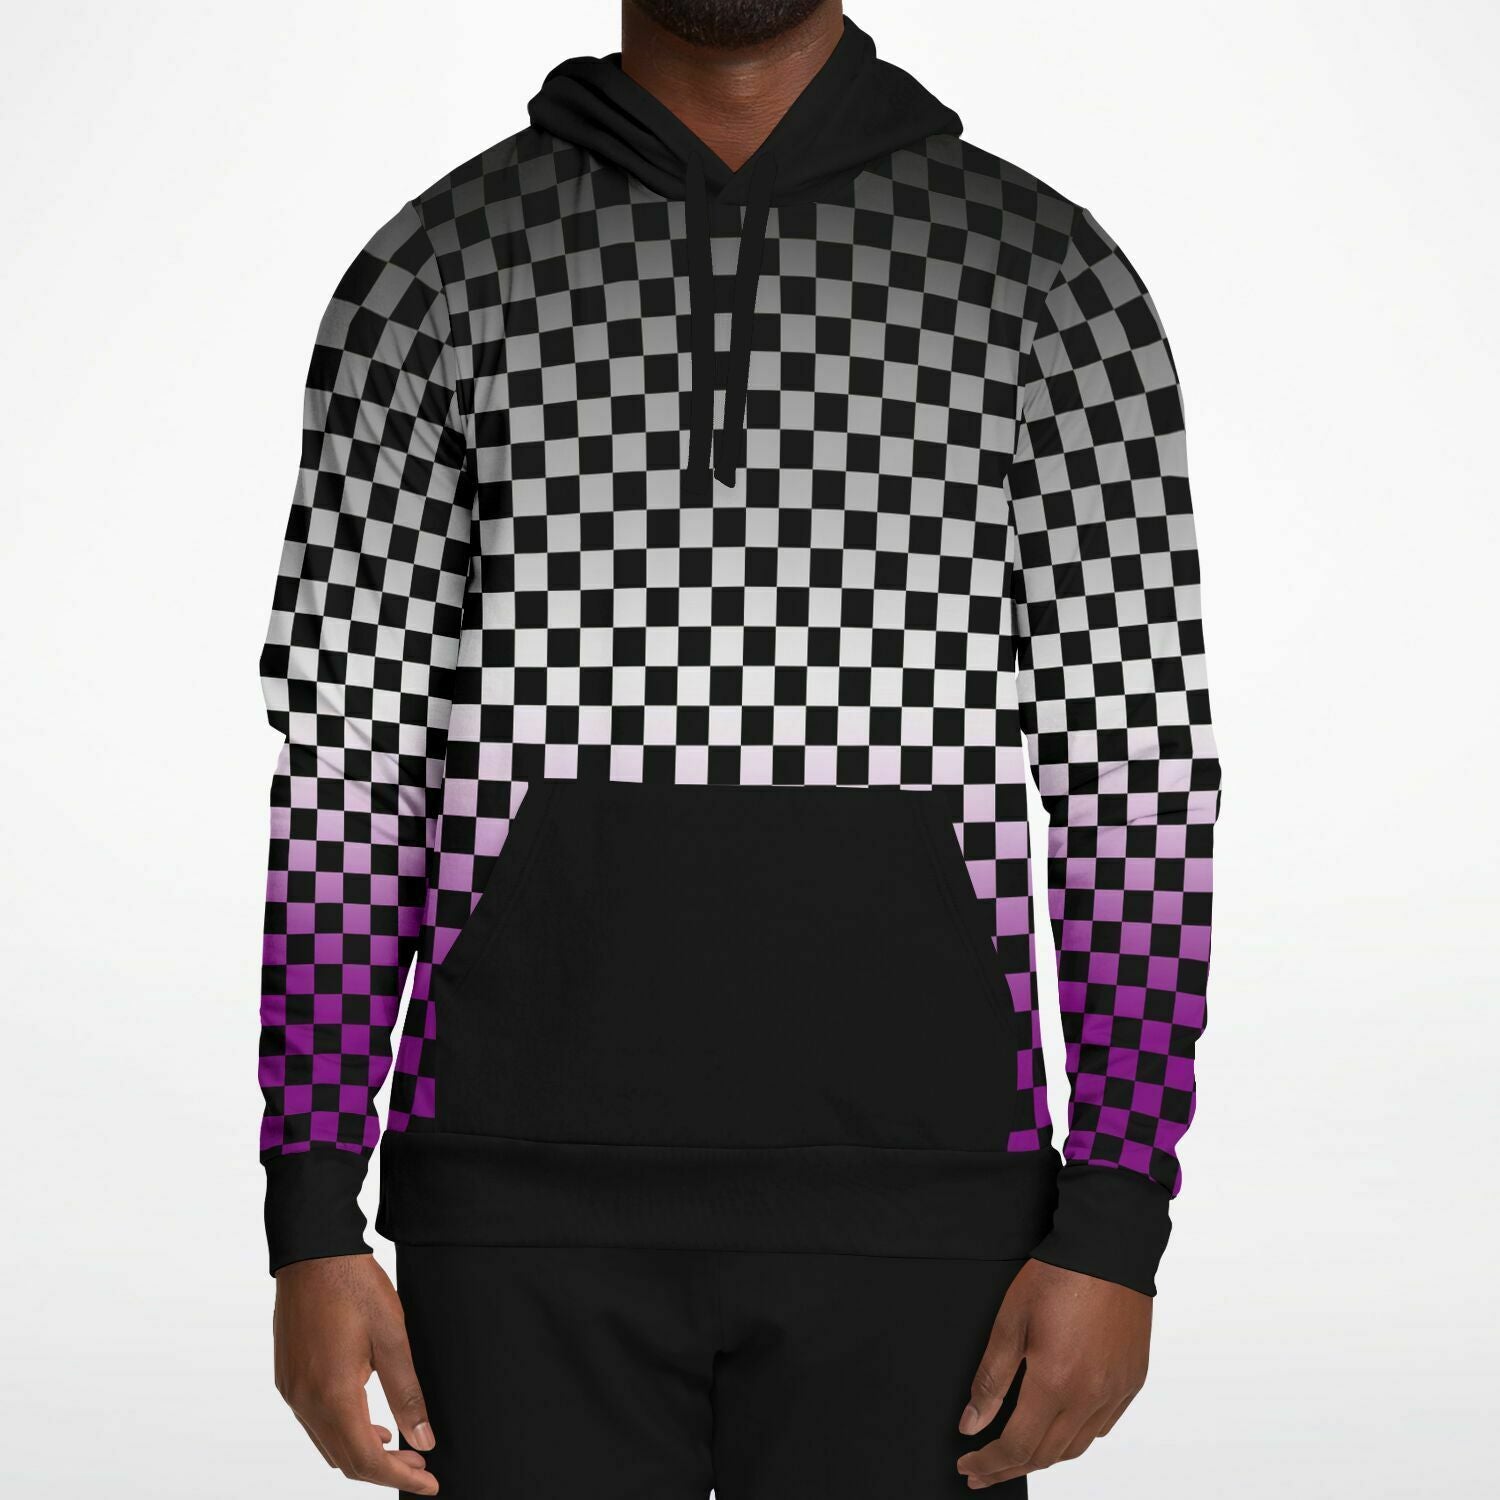 Asexual Pride Black Contrast Checkered Pullover Hoodie Fashion Hoodie - AOP PRIDE MODE